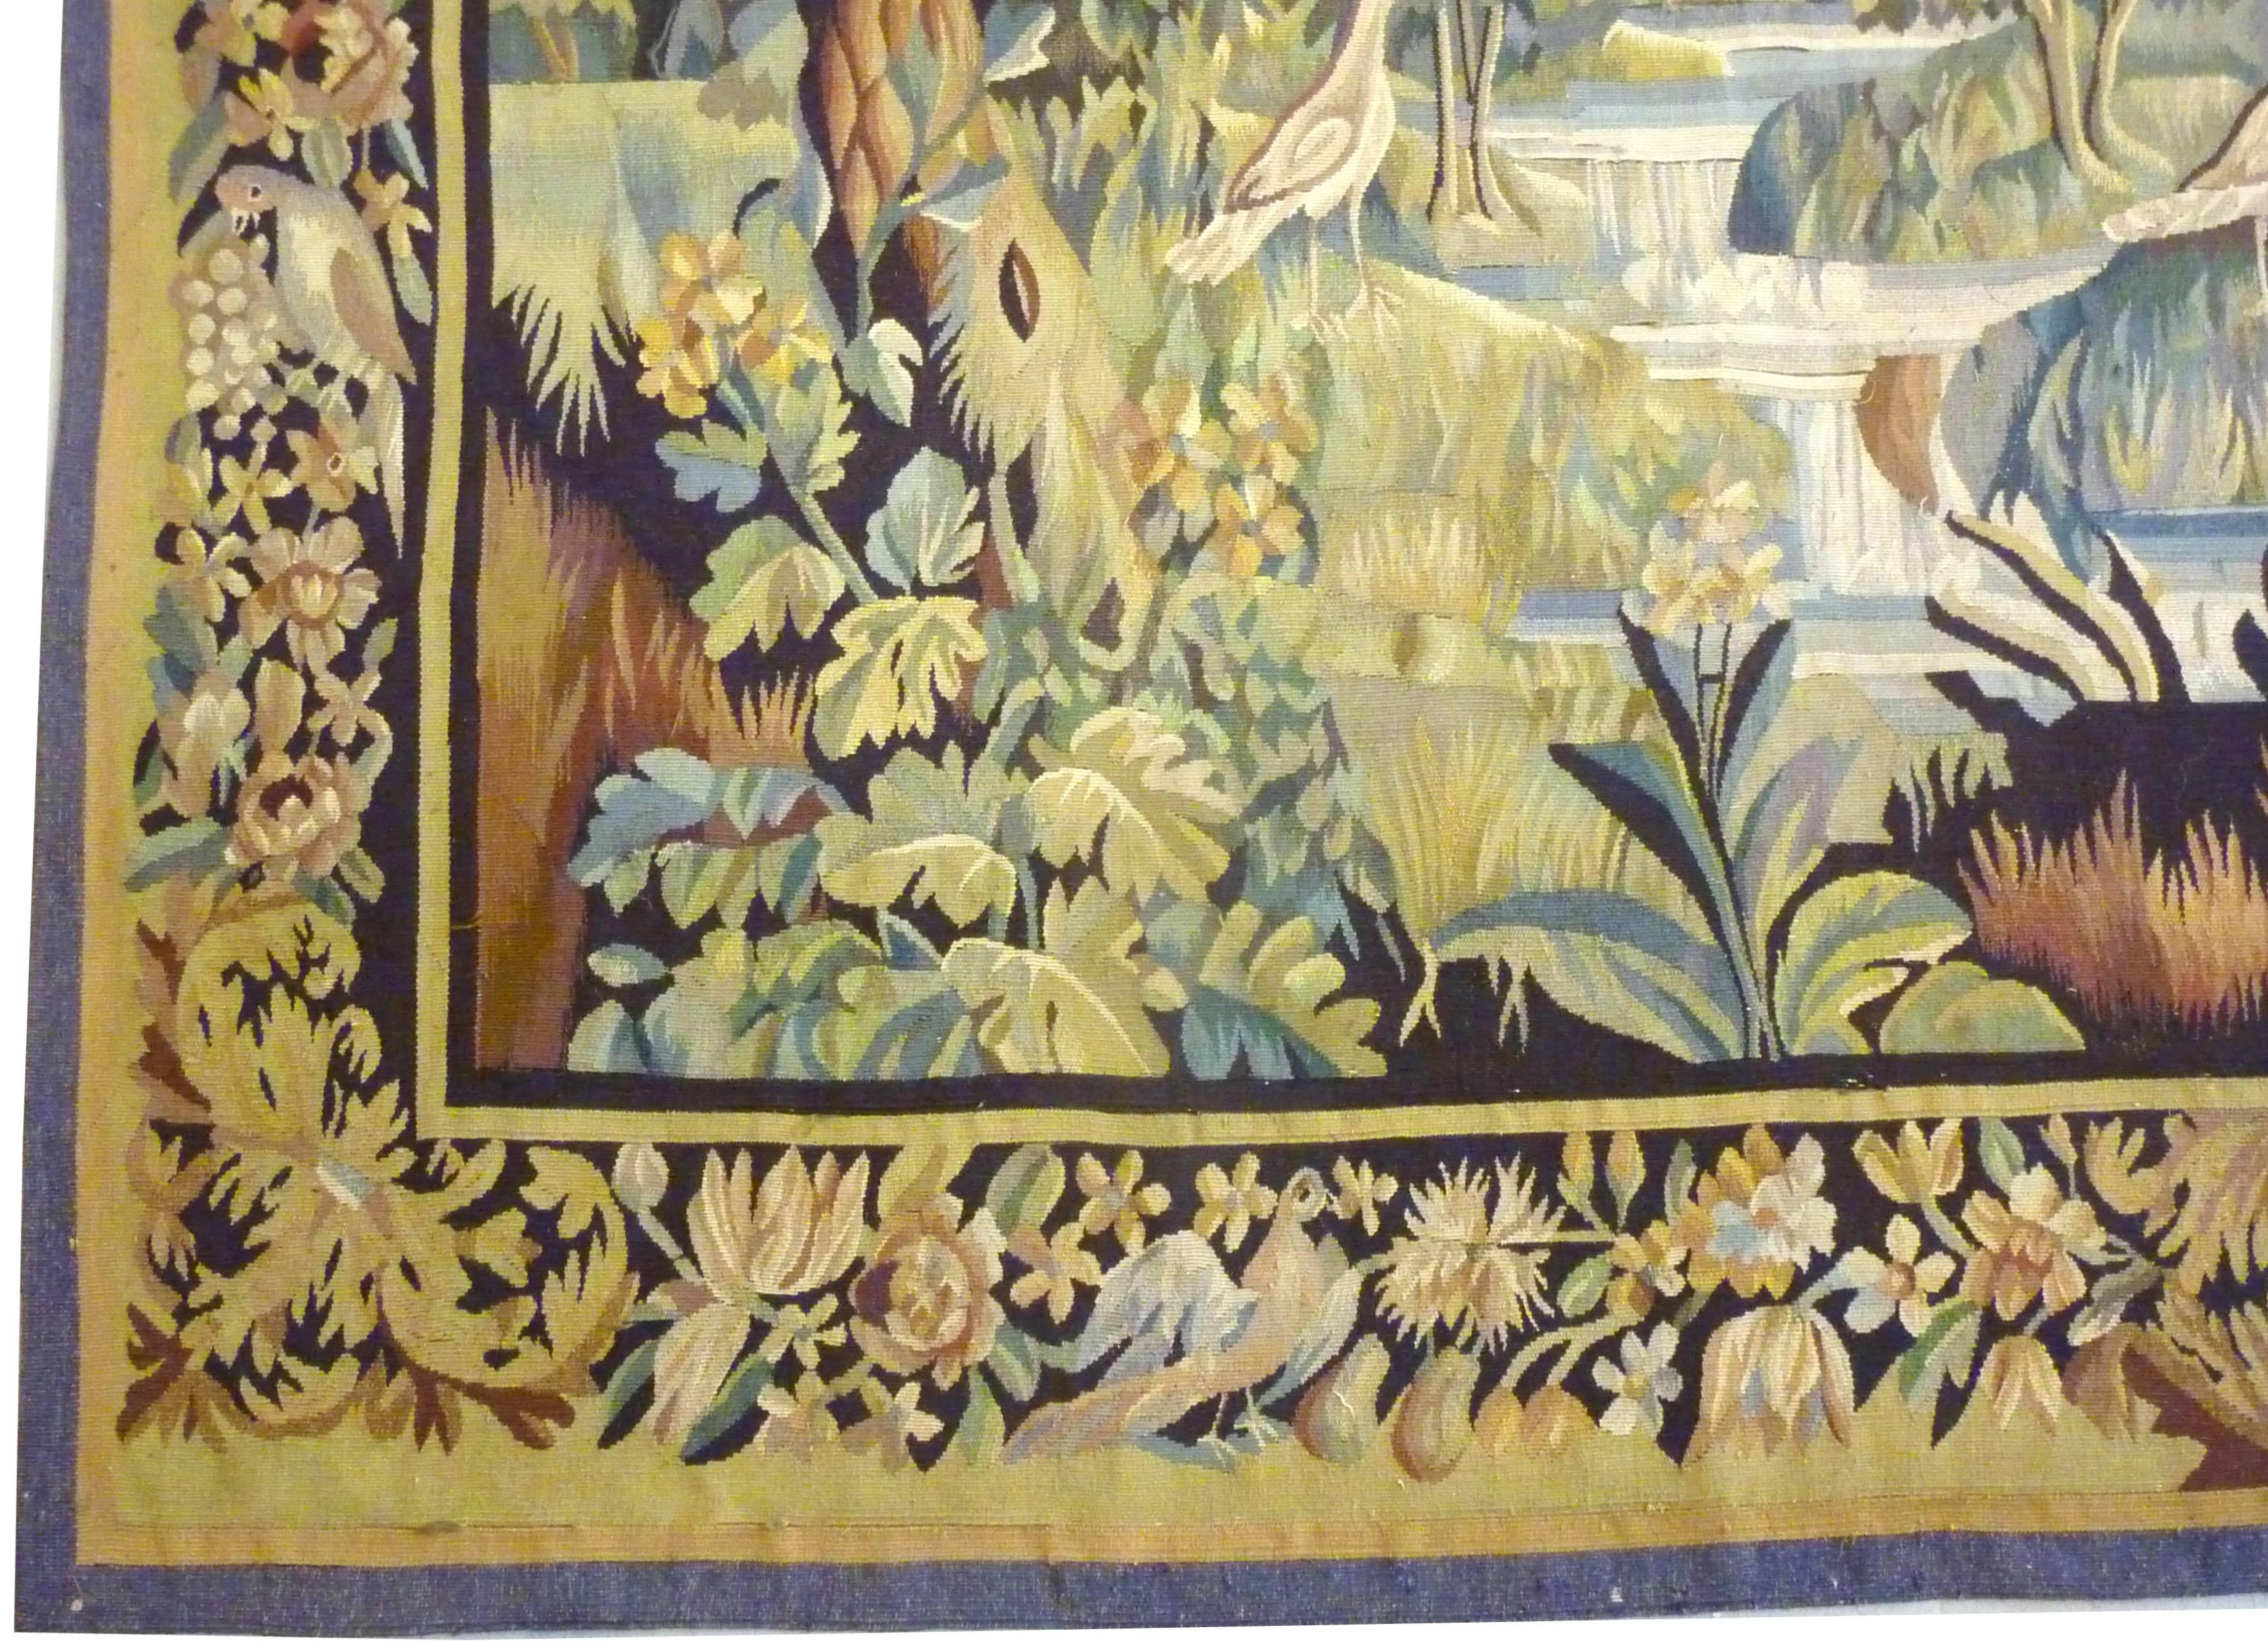 Handwoven tapestry of wool and silk. The French factory of Aubusson is known since the 16th century. It accomplished a progressive Expansion until its apogee during the reign of the Sun-King Louis XIV. In 1664 the King's minister Jean-Baptiste